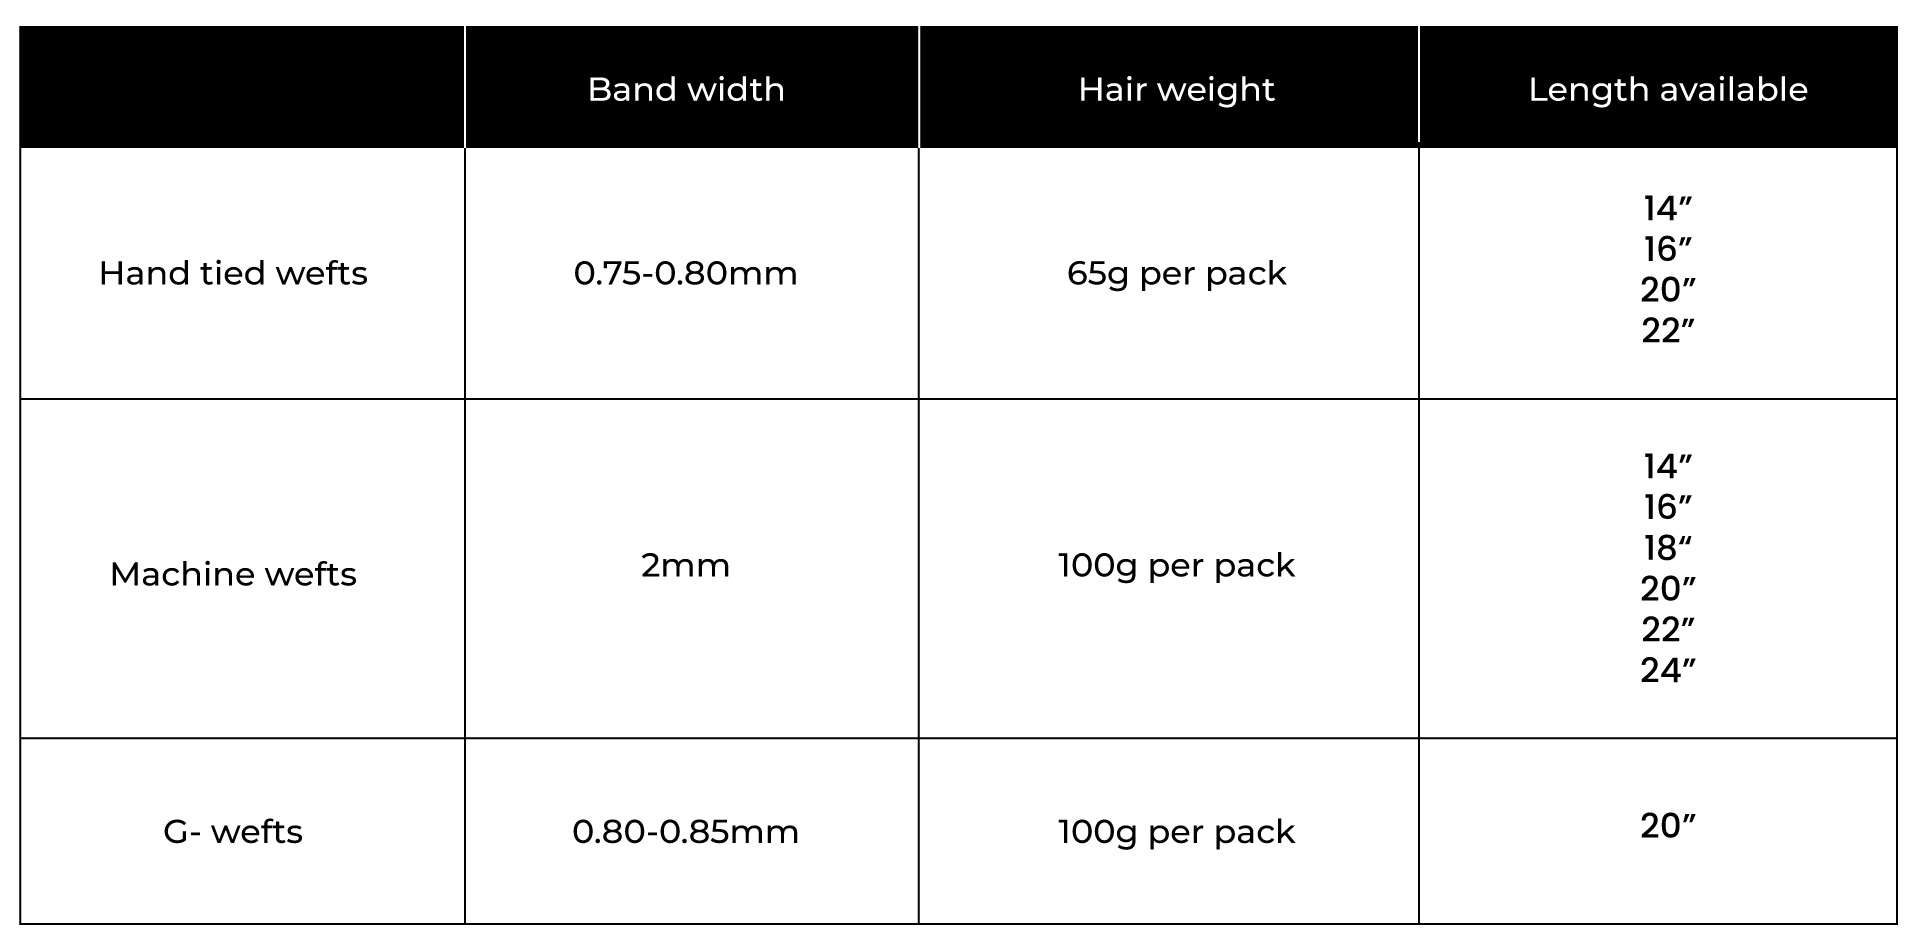 Superhairpieces’ G-wefts